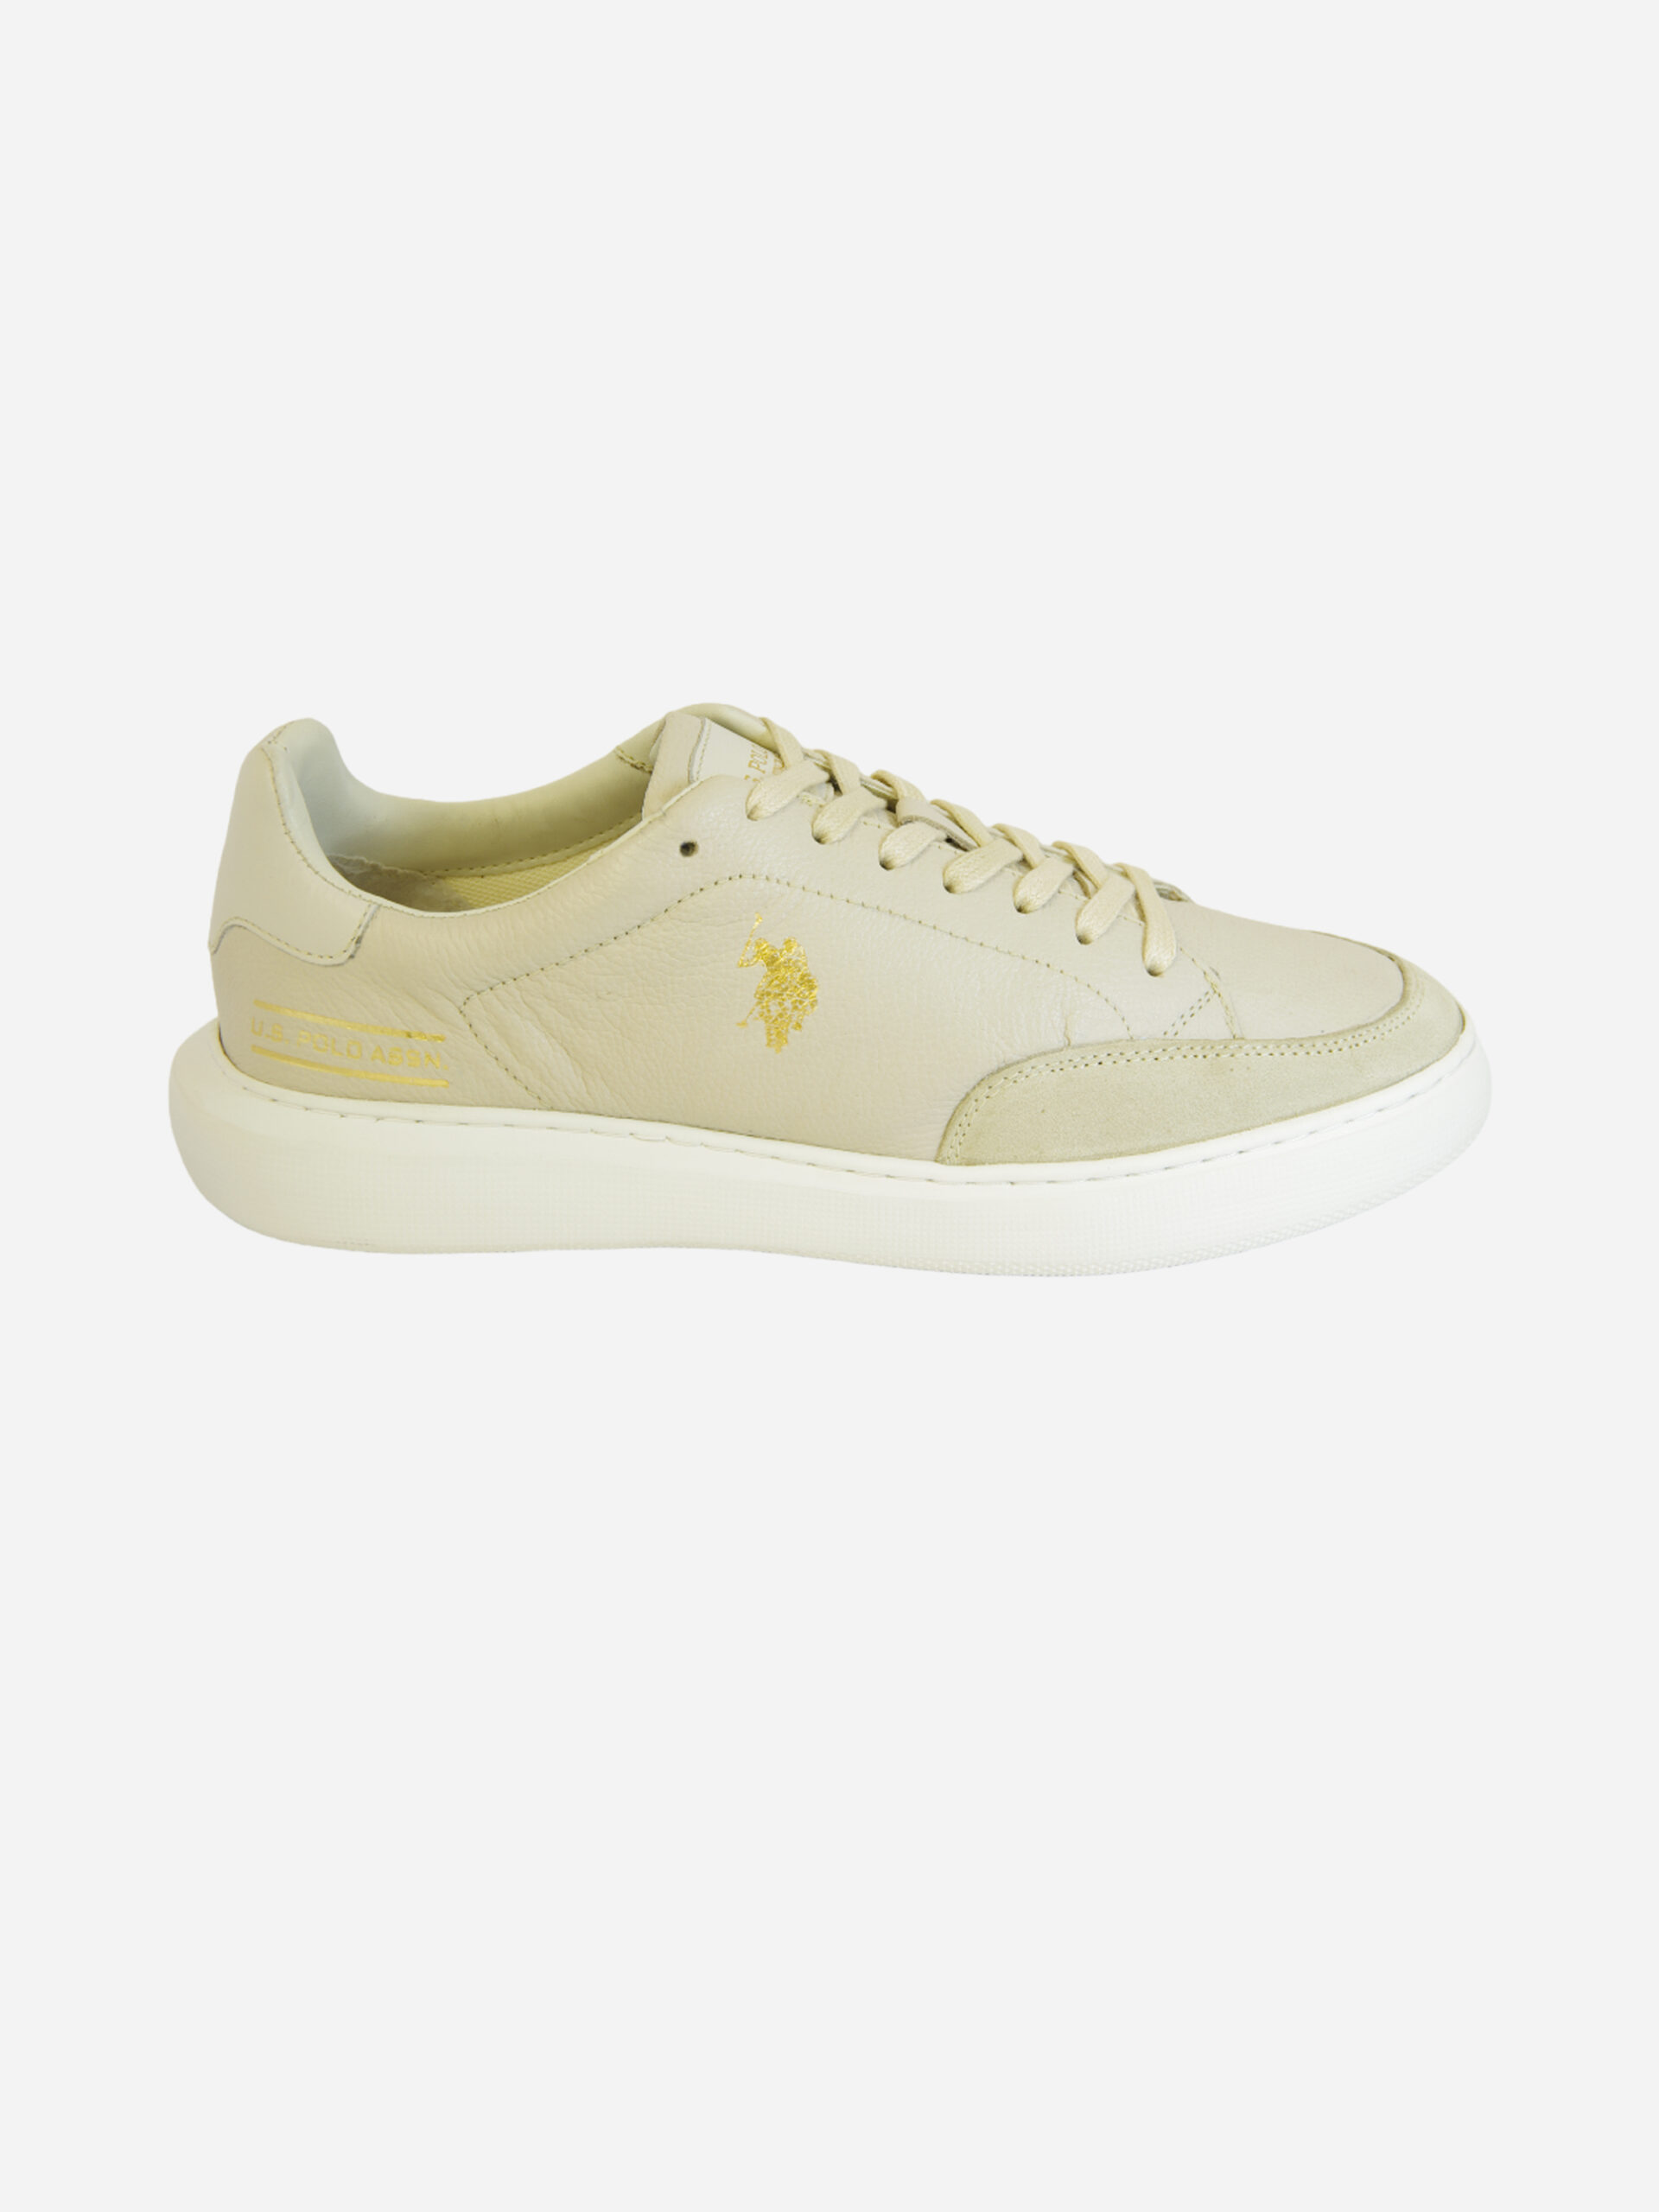 U.S. POLO ASSN Sneakers Cryme beige